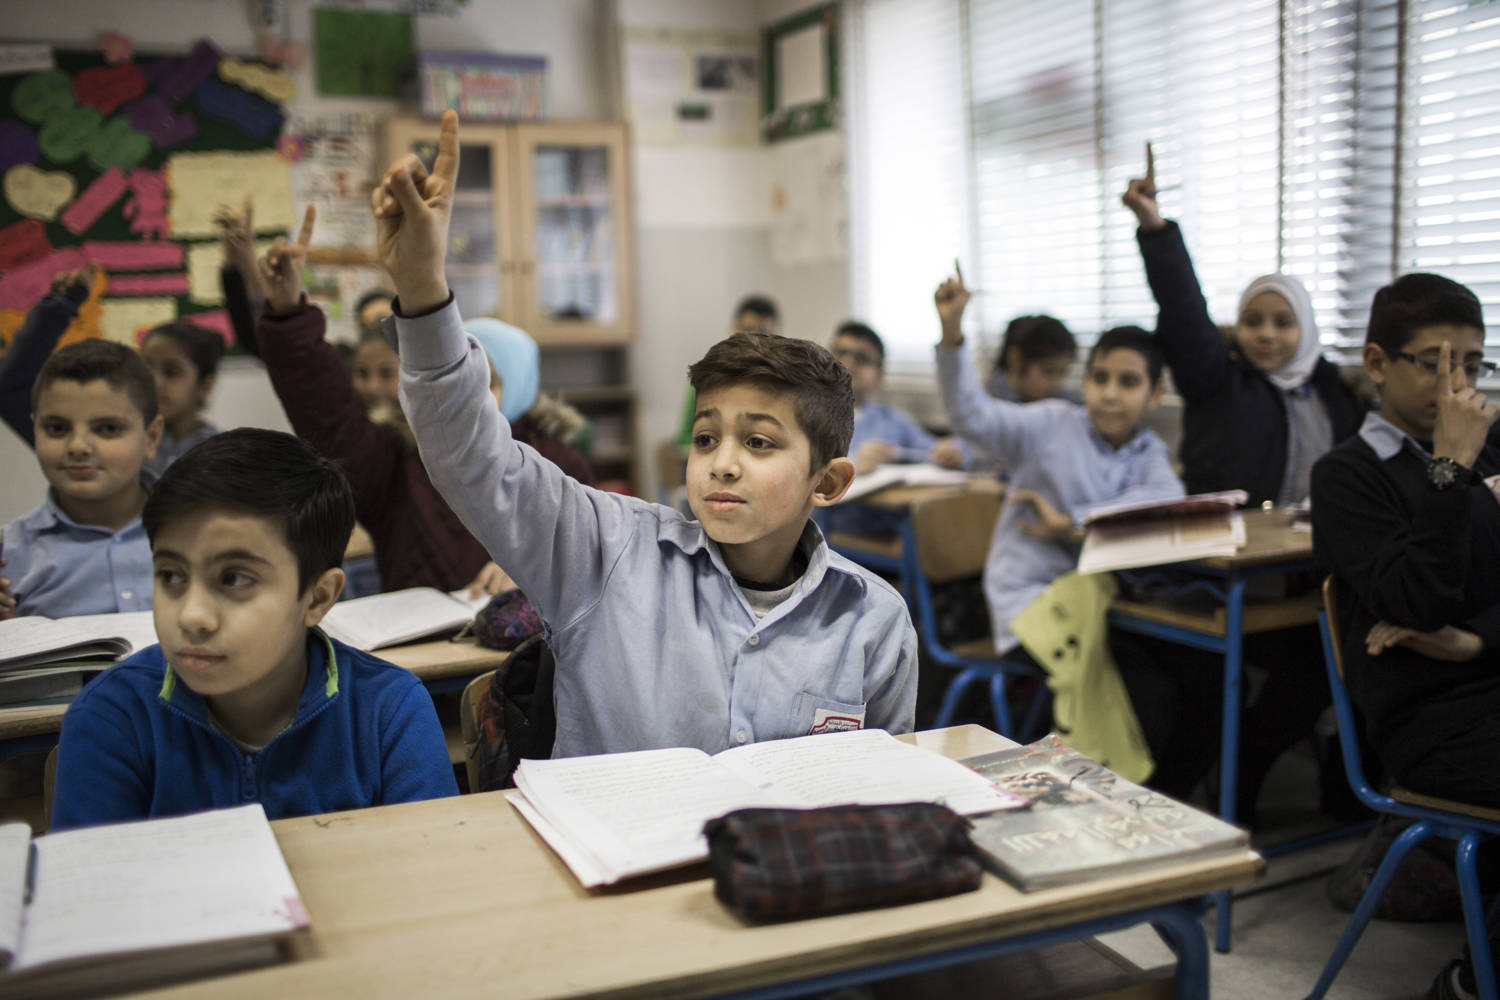 Syrian and Lebanese students sit together in classes at the Mohammed Shamel mixed Elementary public school in Tariq el Jdideh, Beirut, Lebanon. Adam Patterson/Panos/DFID via Flickr